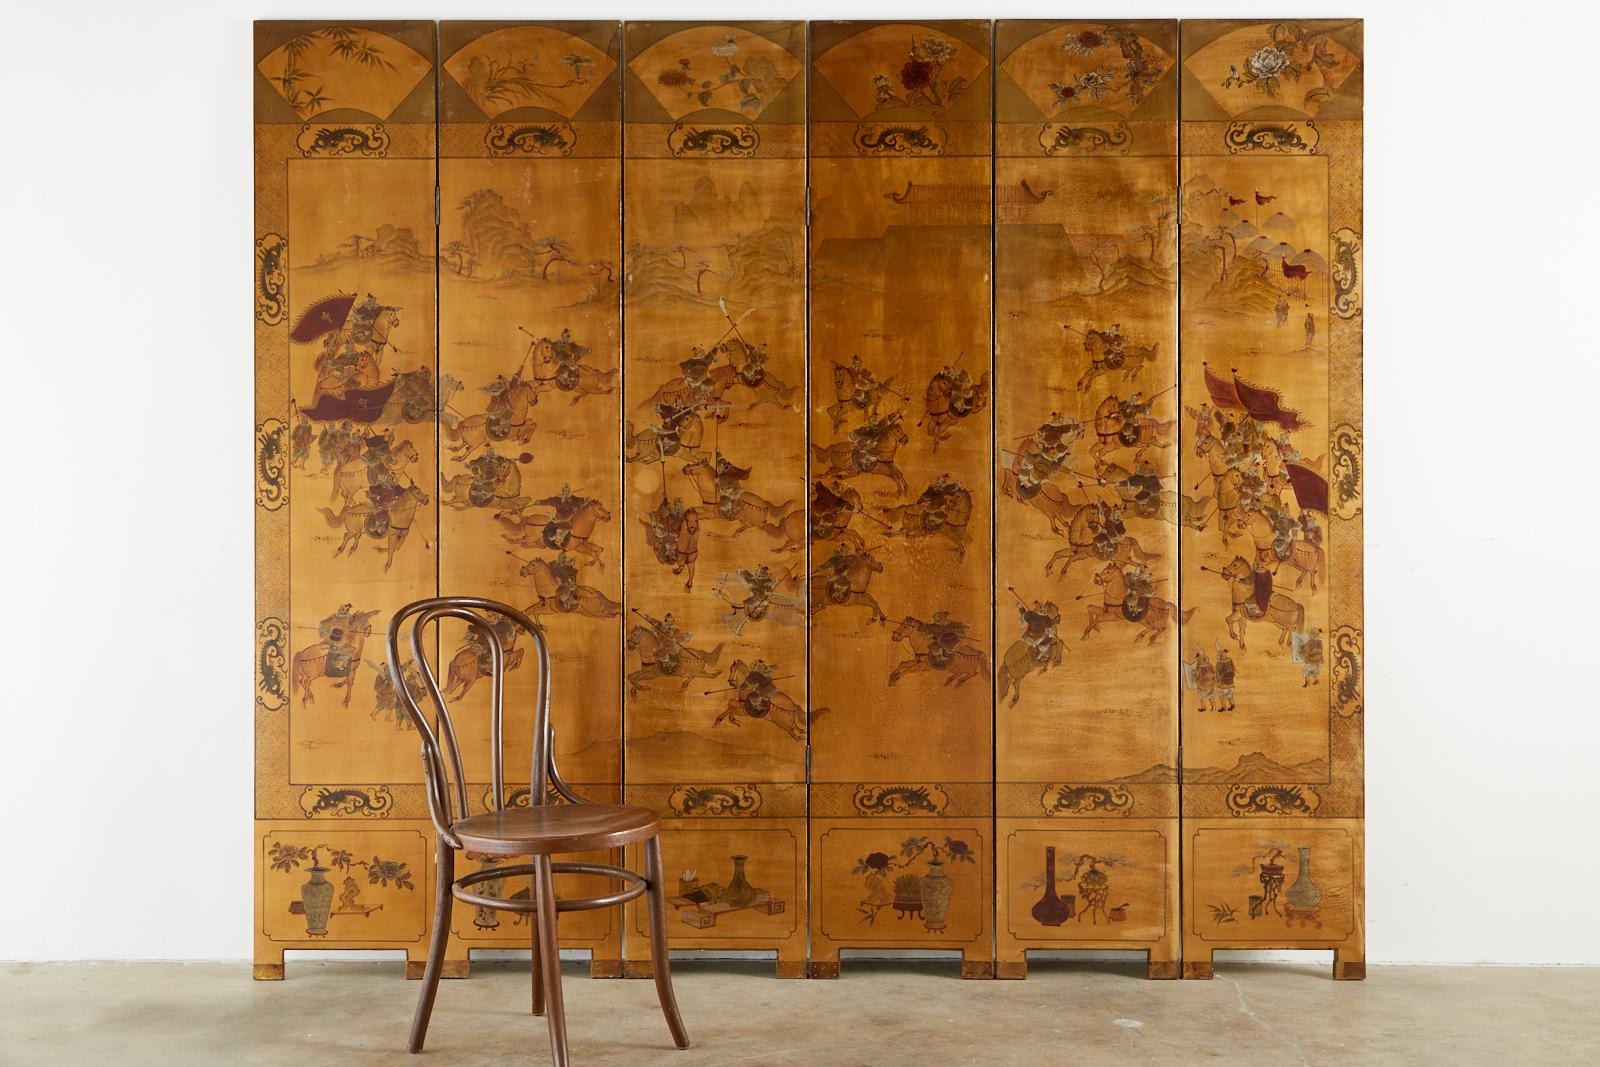 Fascinating Qing style Chinese export six-panel coromandel screen featuring a lacquer painted battle scene on a dramatic gilt background. The scene is bordered by a dragon motif and has decorative fans on the top of each panel and floral vases with